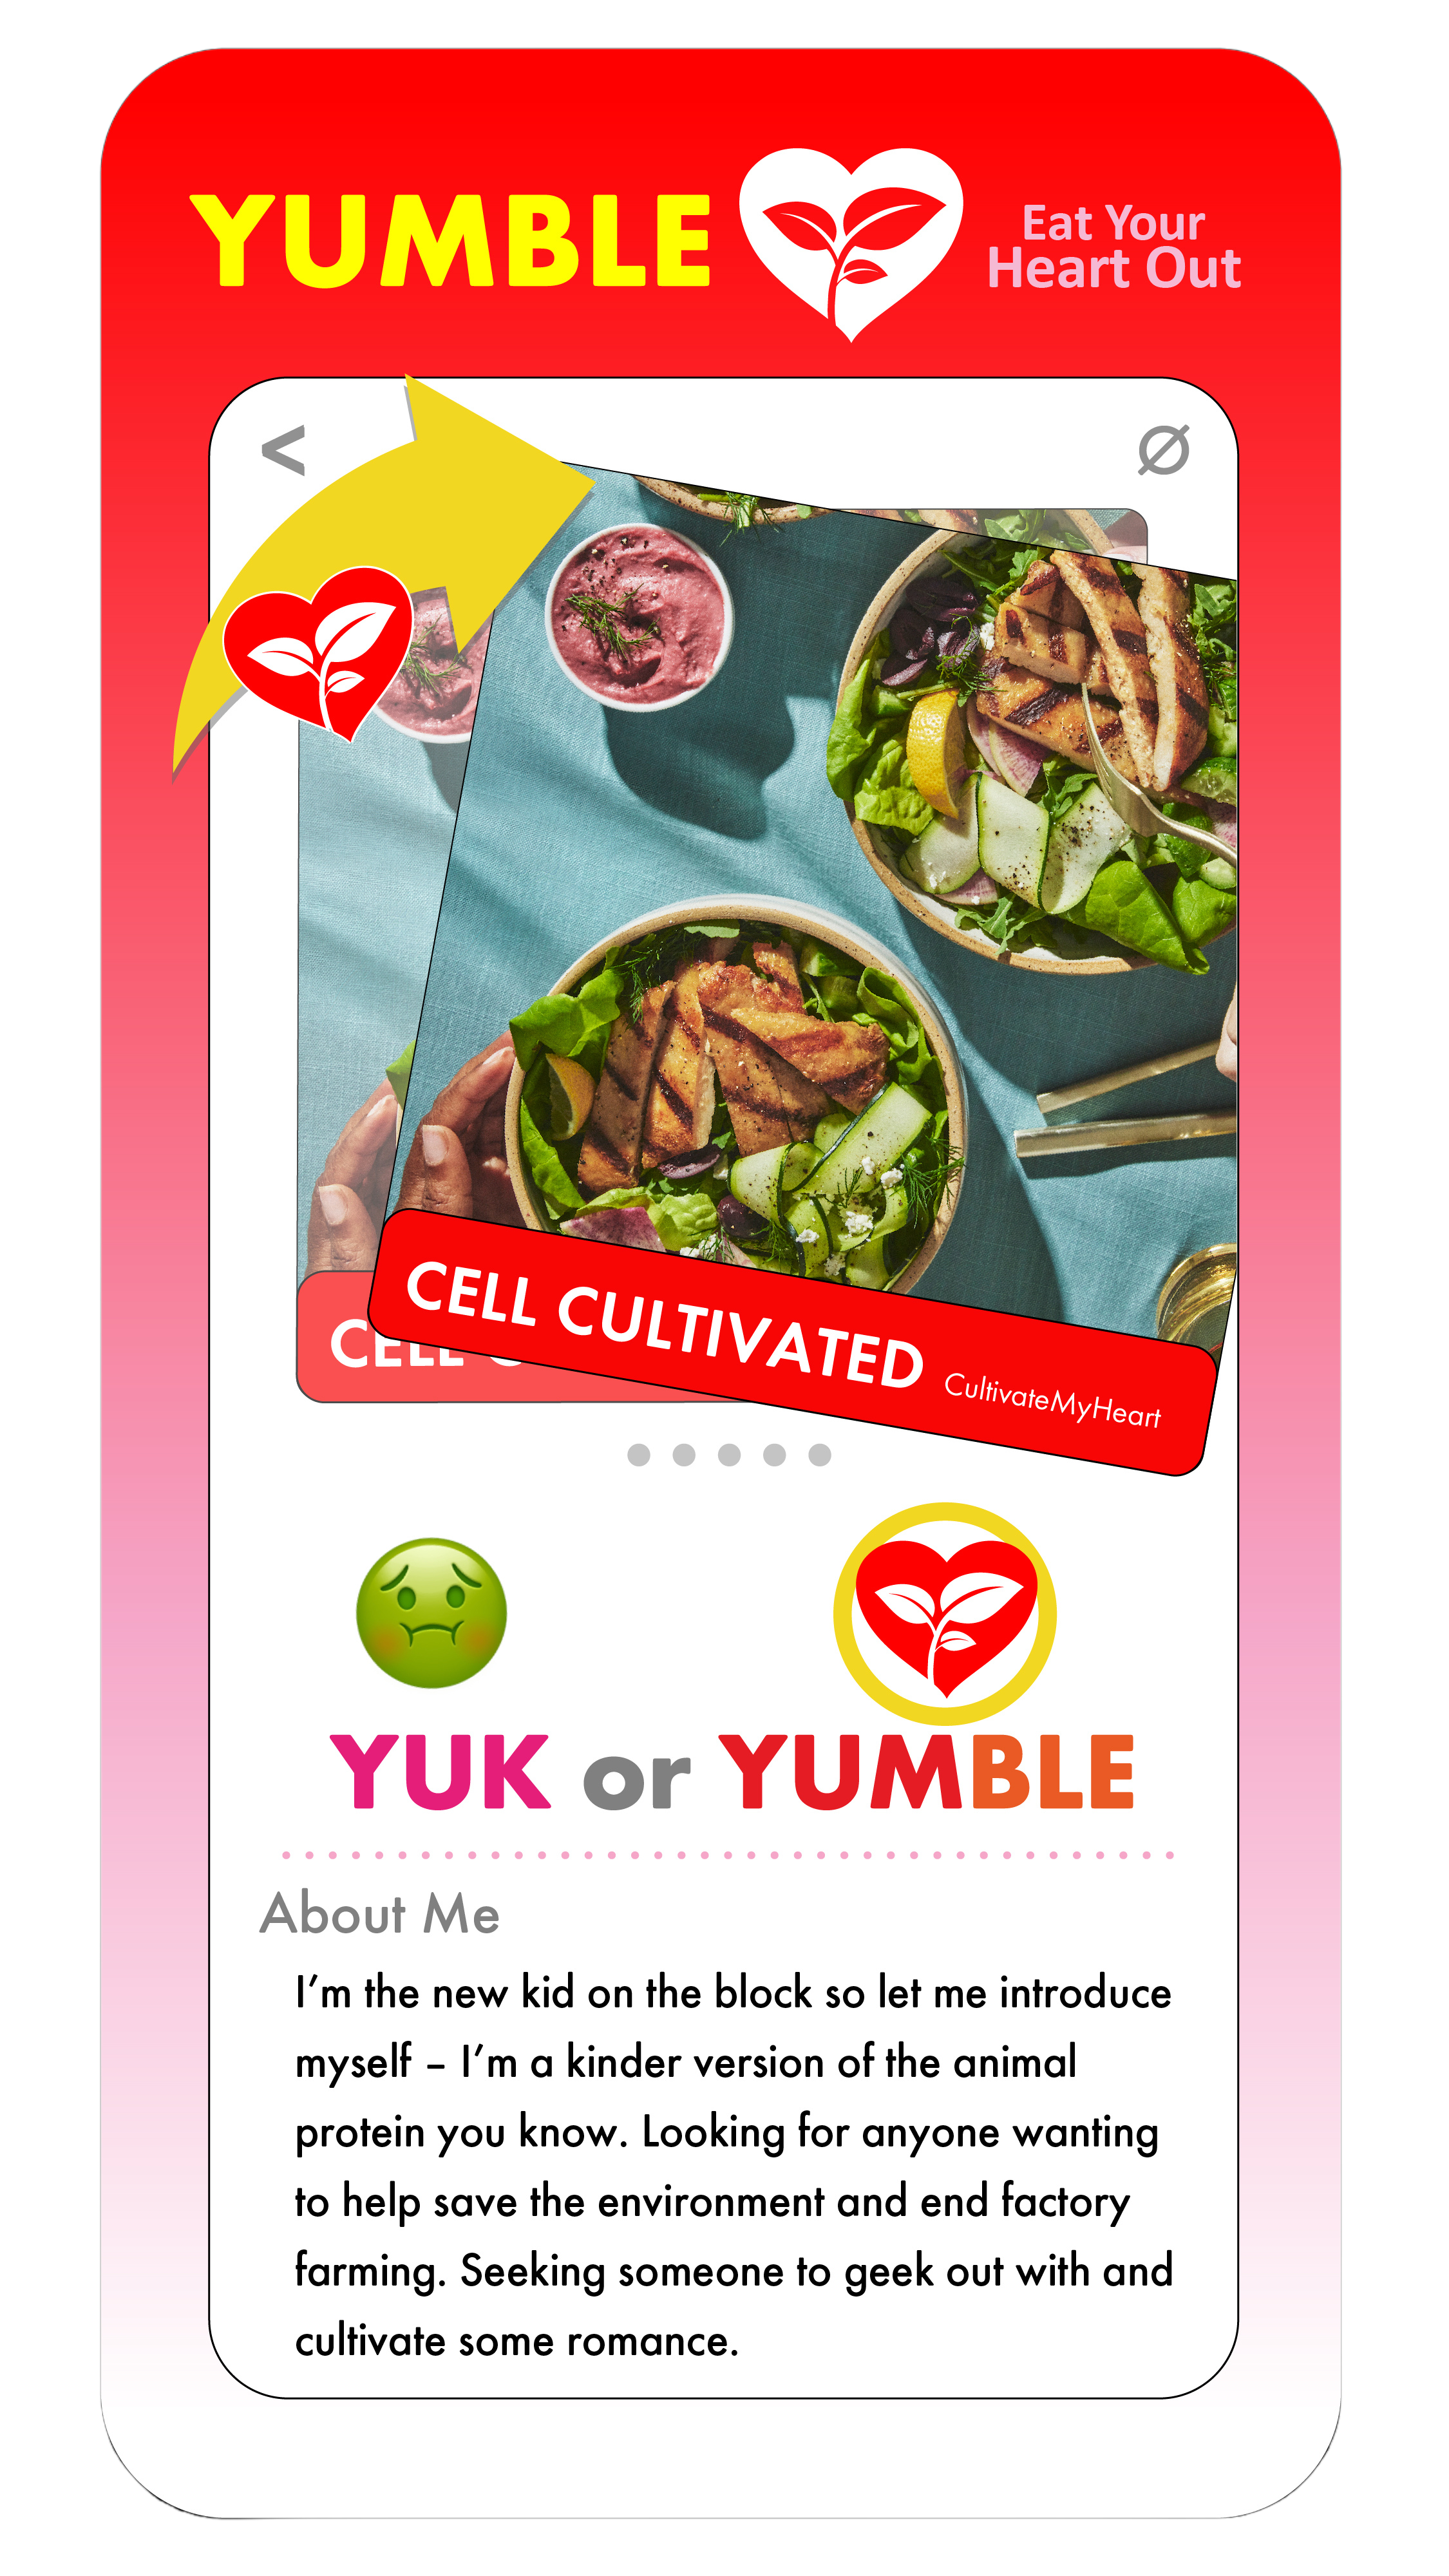 Cell cultivated meat YUMBLE profile